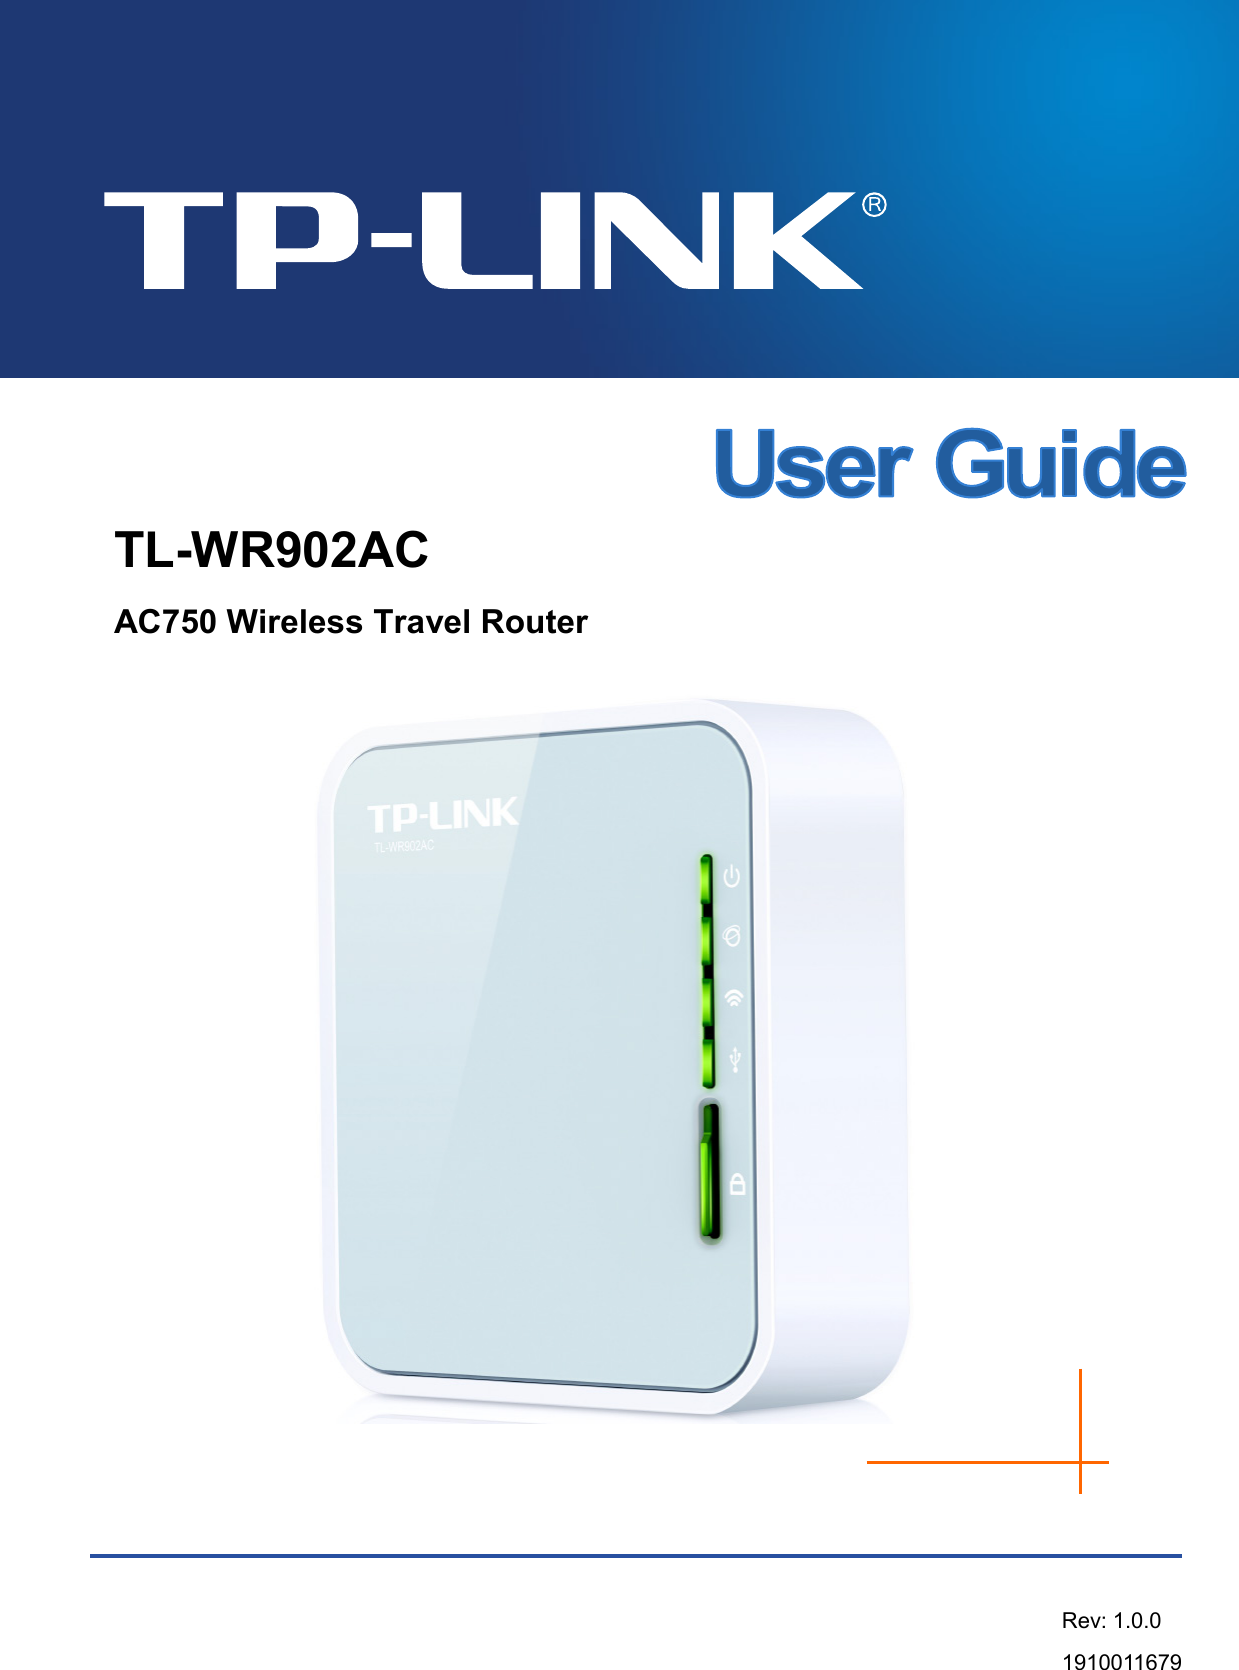      TL-WR902AC AC750 Wireless Travel Router Rev: 1.0.0 1910011679 